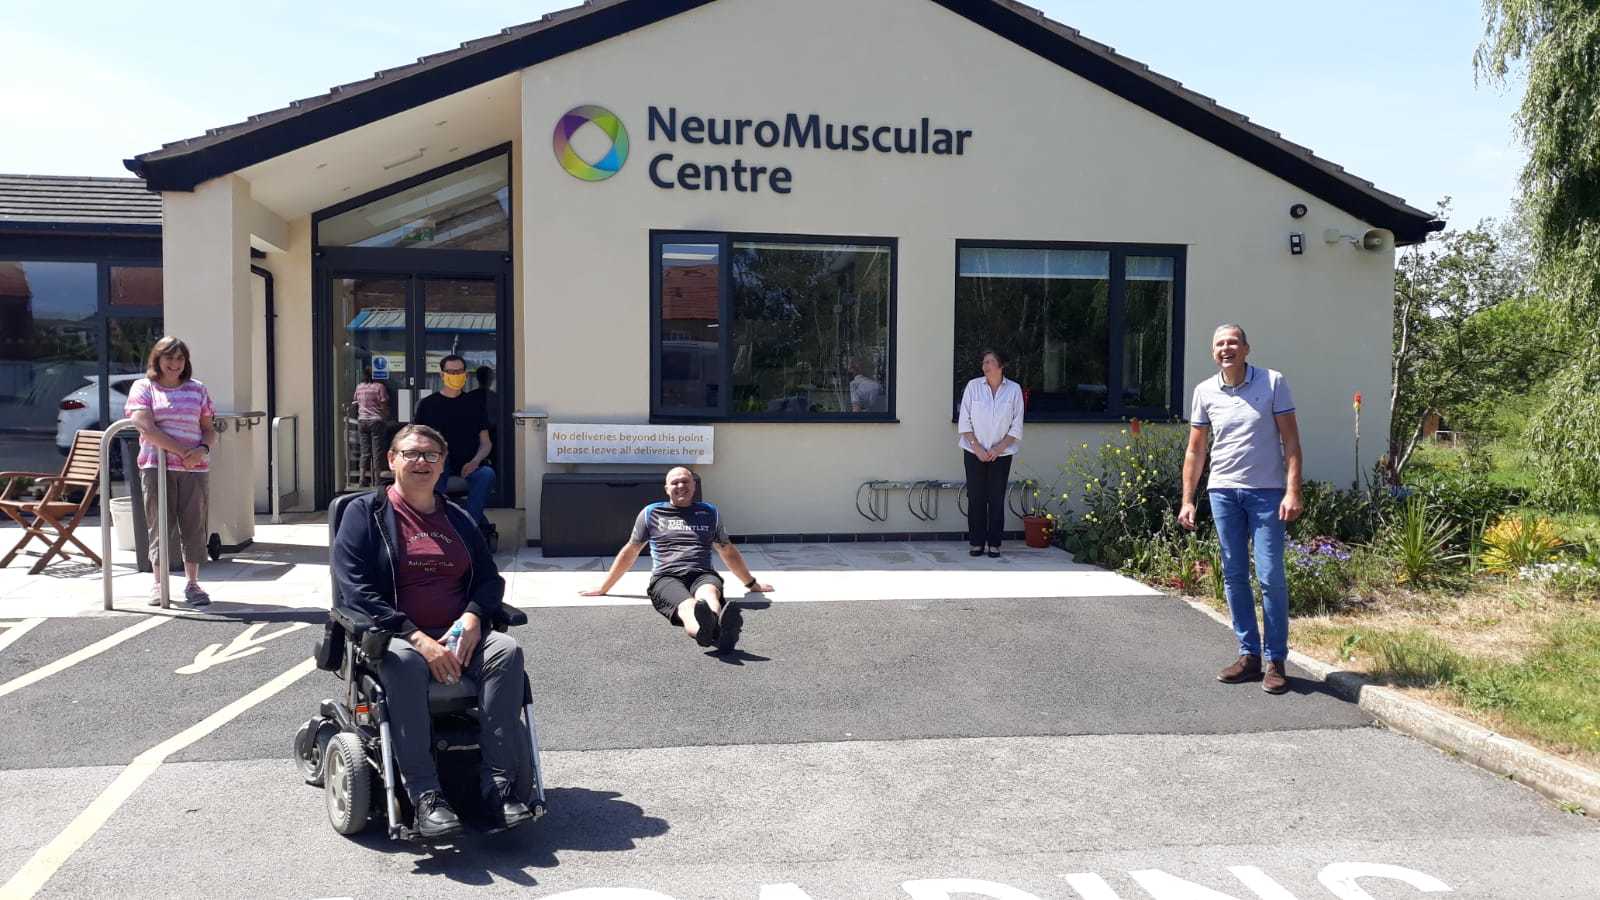 It costs around £3,000 a day to run the NeuroMuscular Centre in Winsford 